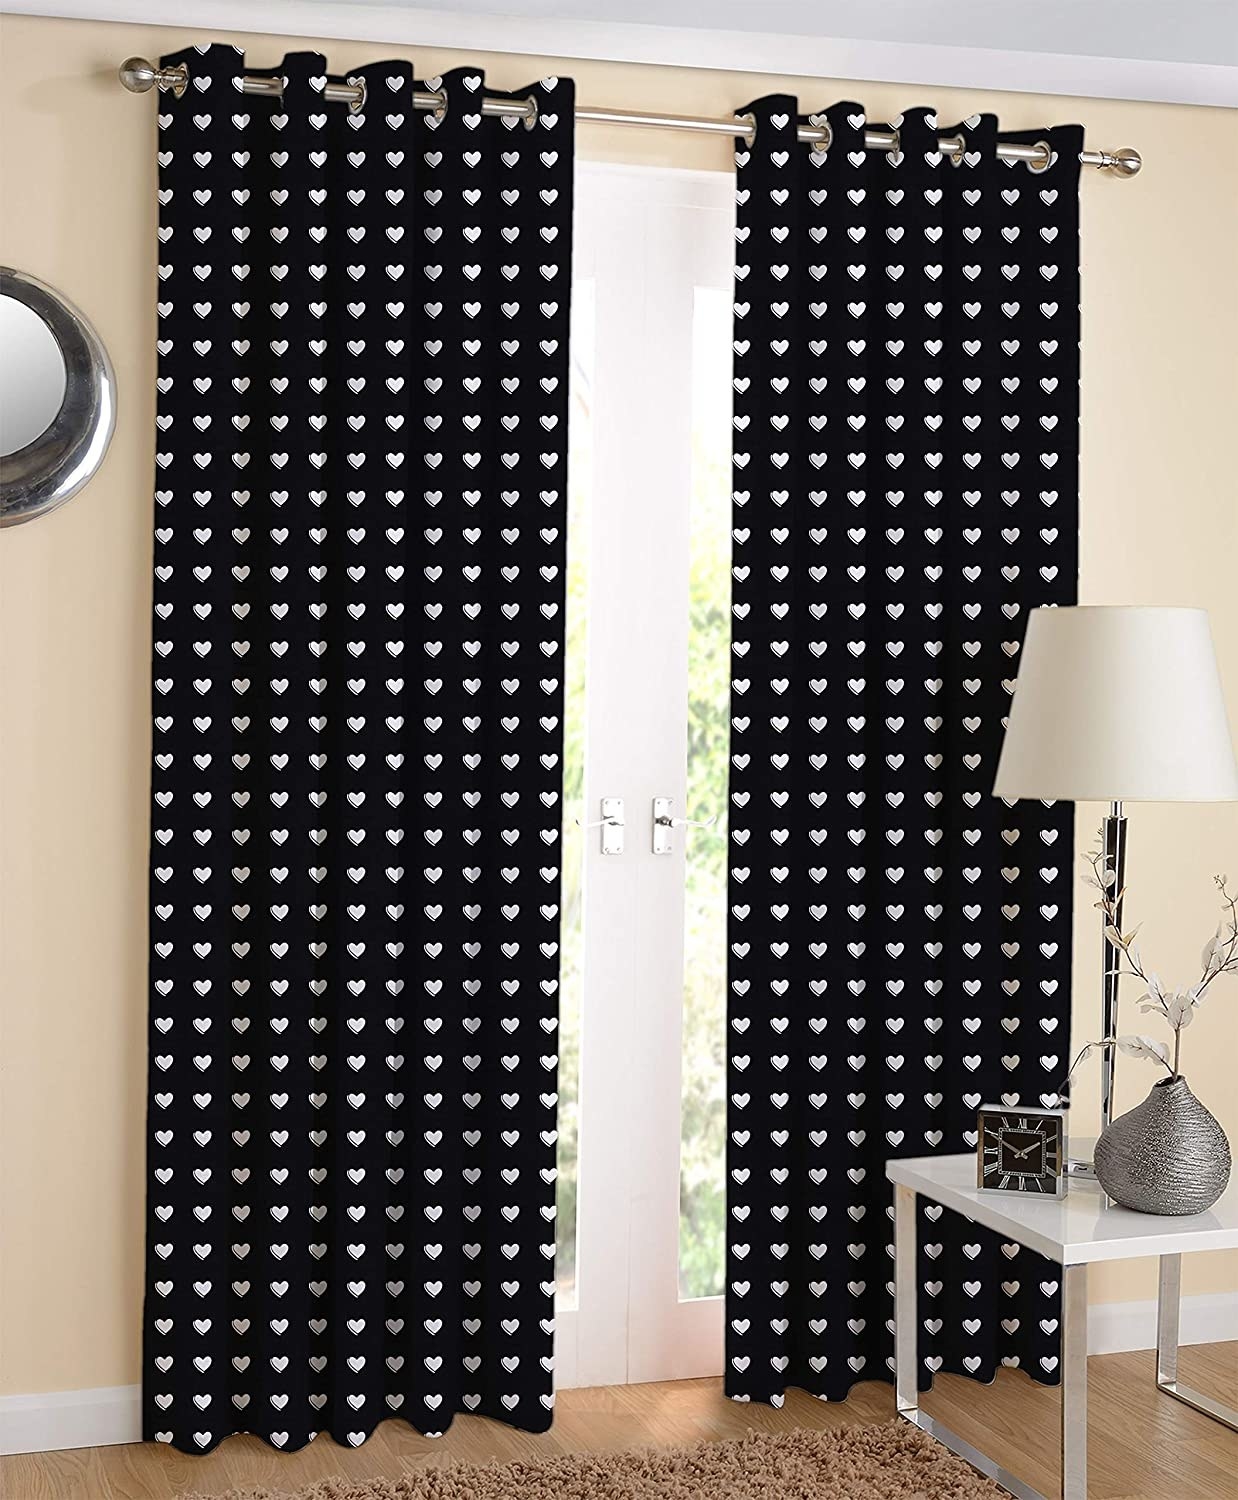 A pair of black curtains hanging in front of a door.